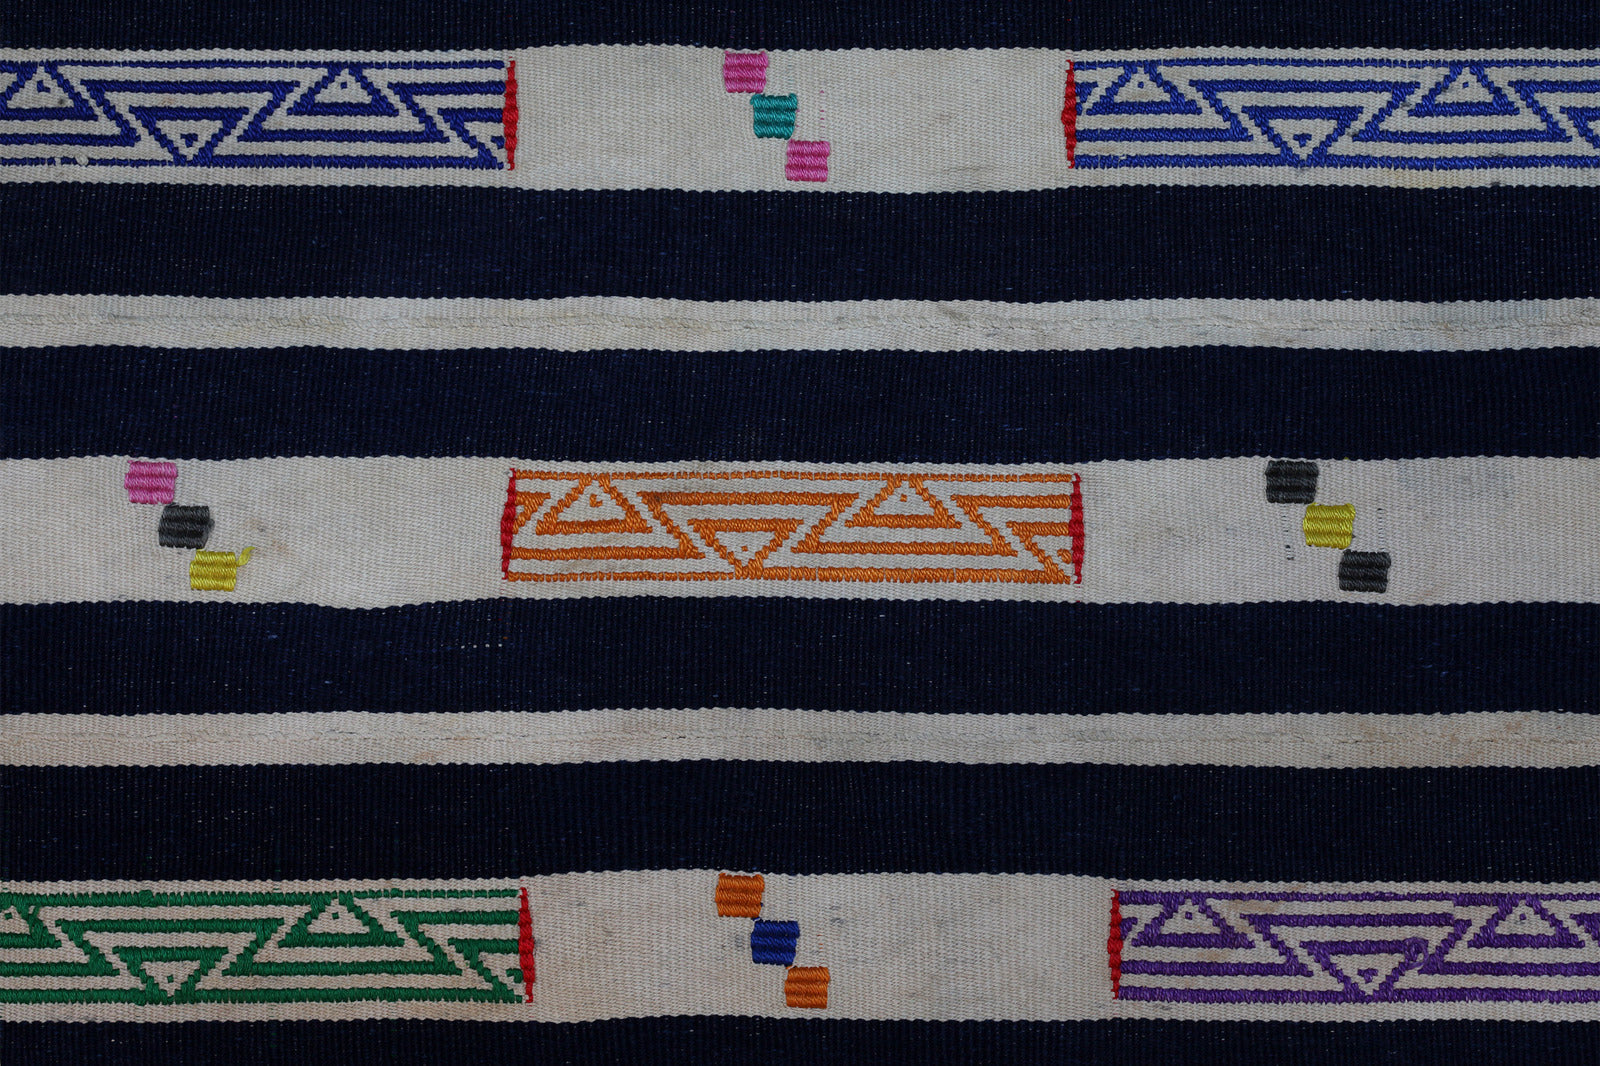 Tribal Textiles - Traditional - Folk Art - African - Artifacts - Objects - Collectible - Home Decor - Cotton Wrap Ikat Cloth - Handwoven Baule Tribe - Ivory Coast - Beautiful Unique Cloth - Perfect for use as - Tapestry Wall Hanging - One - Of - A - Kind - Piece - Collection - African Collectibles